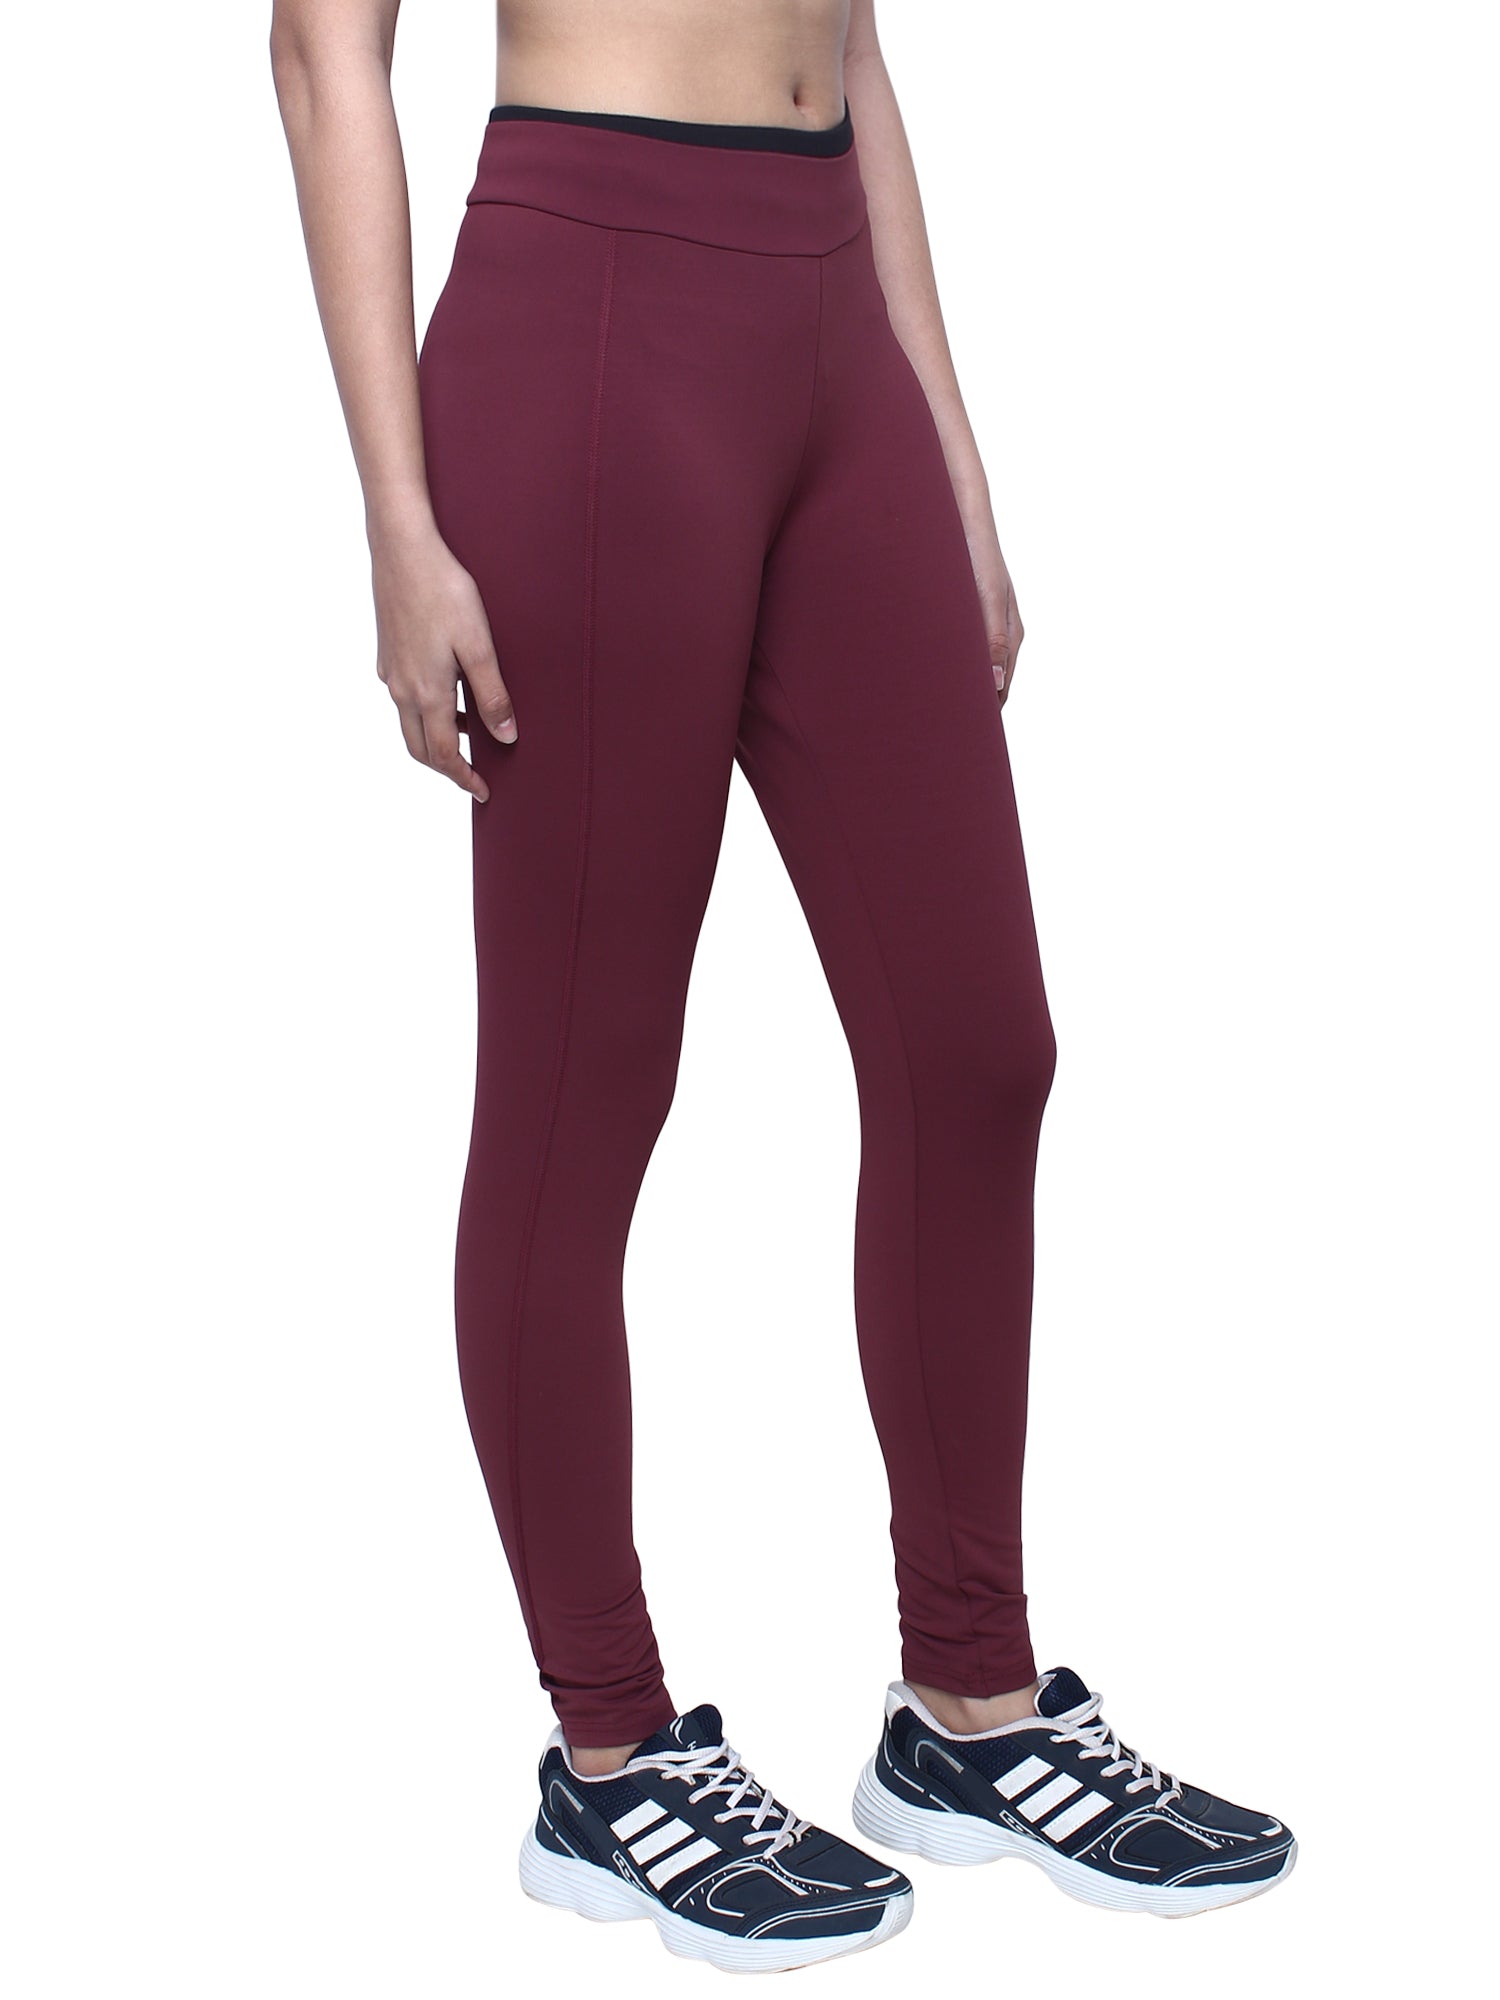 7 best workout pants for women for a comfortable fitness session |  HealthShots